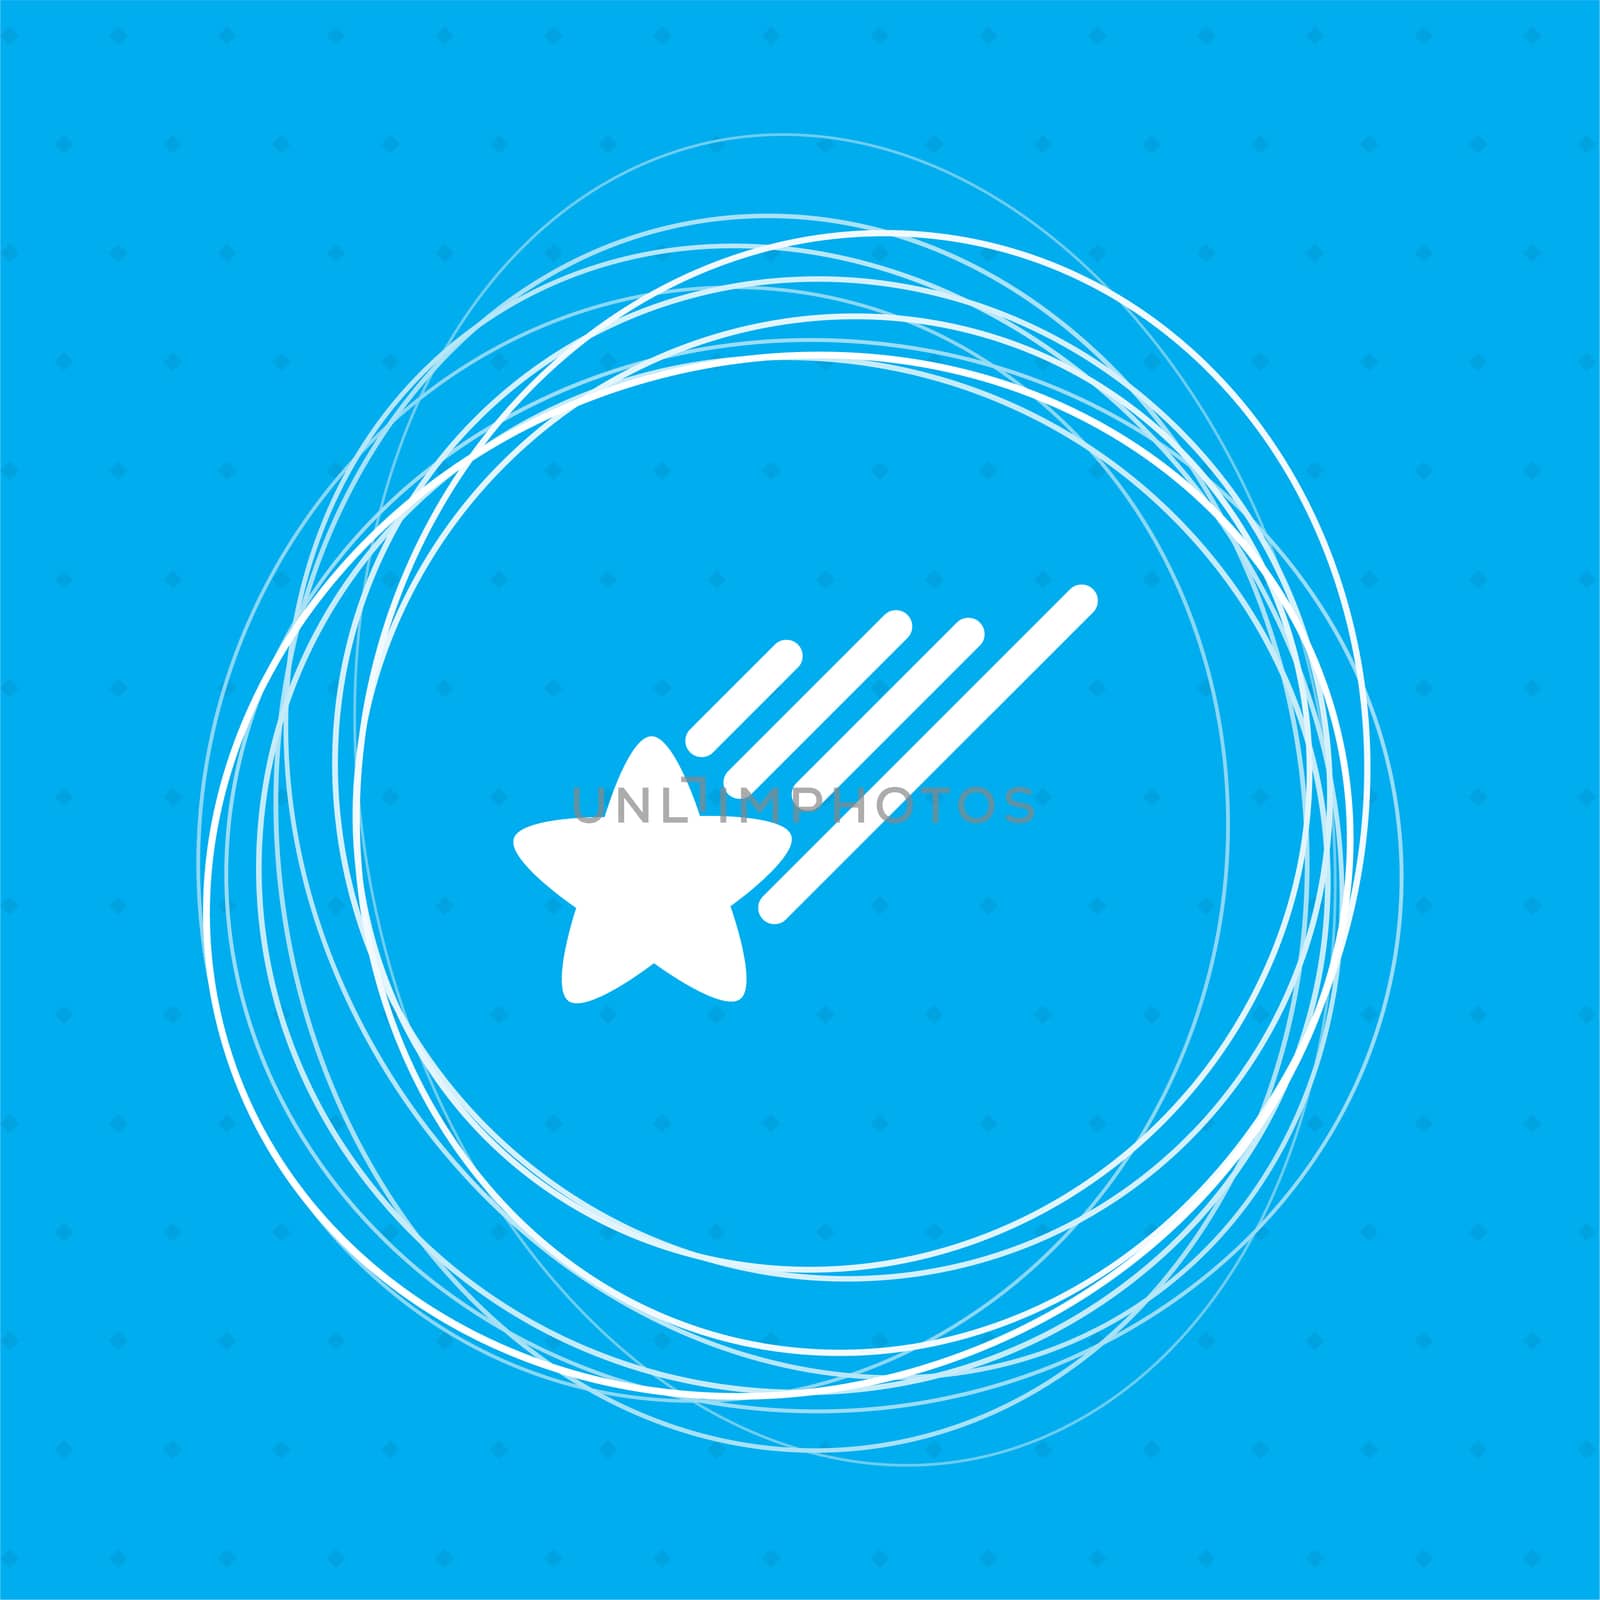 Star Icon on a blue background with abstract circles around and place for your text.  by Adamchuk